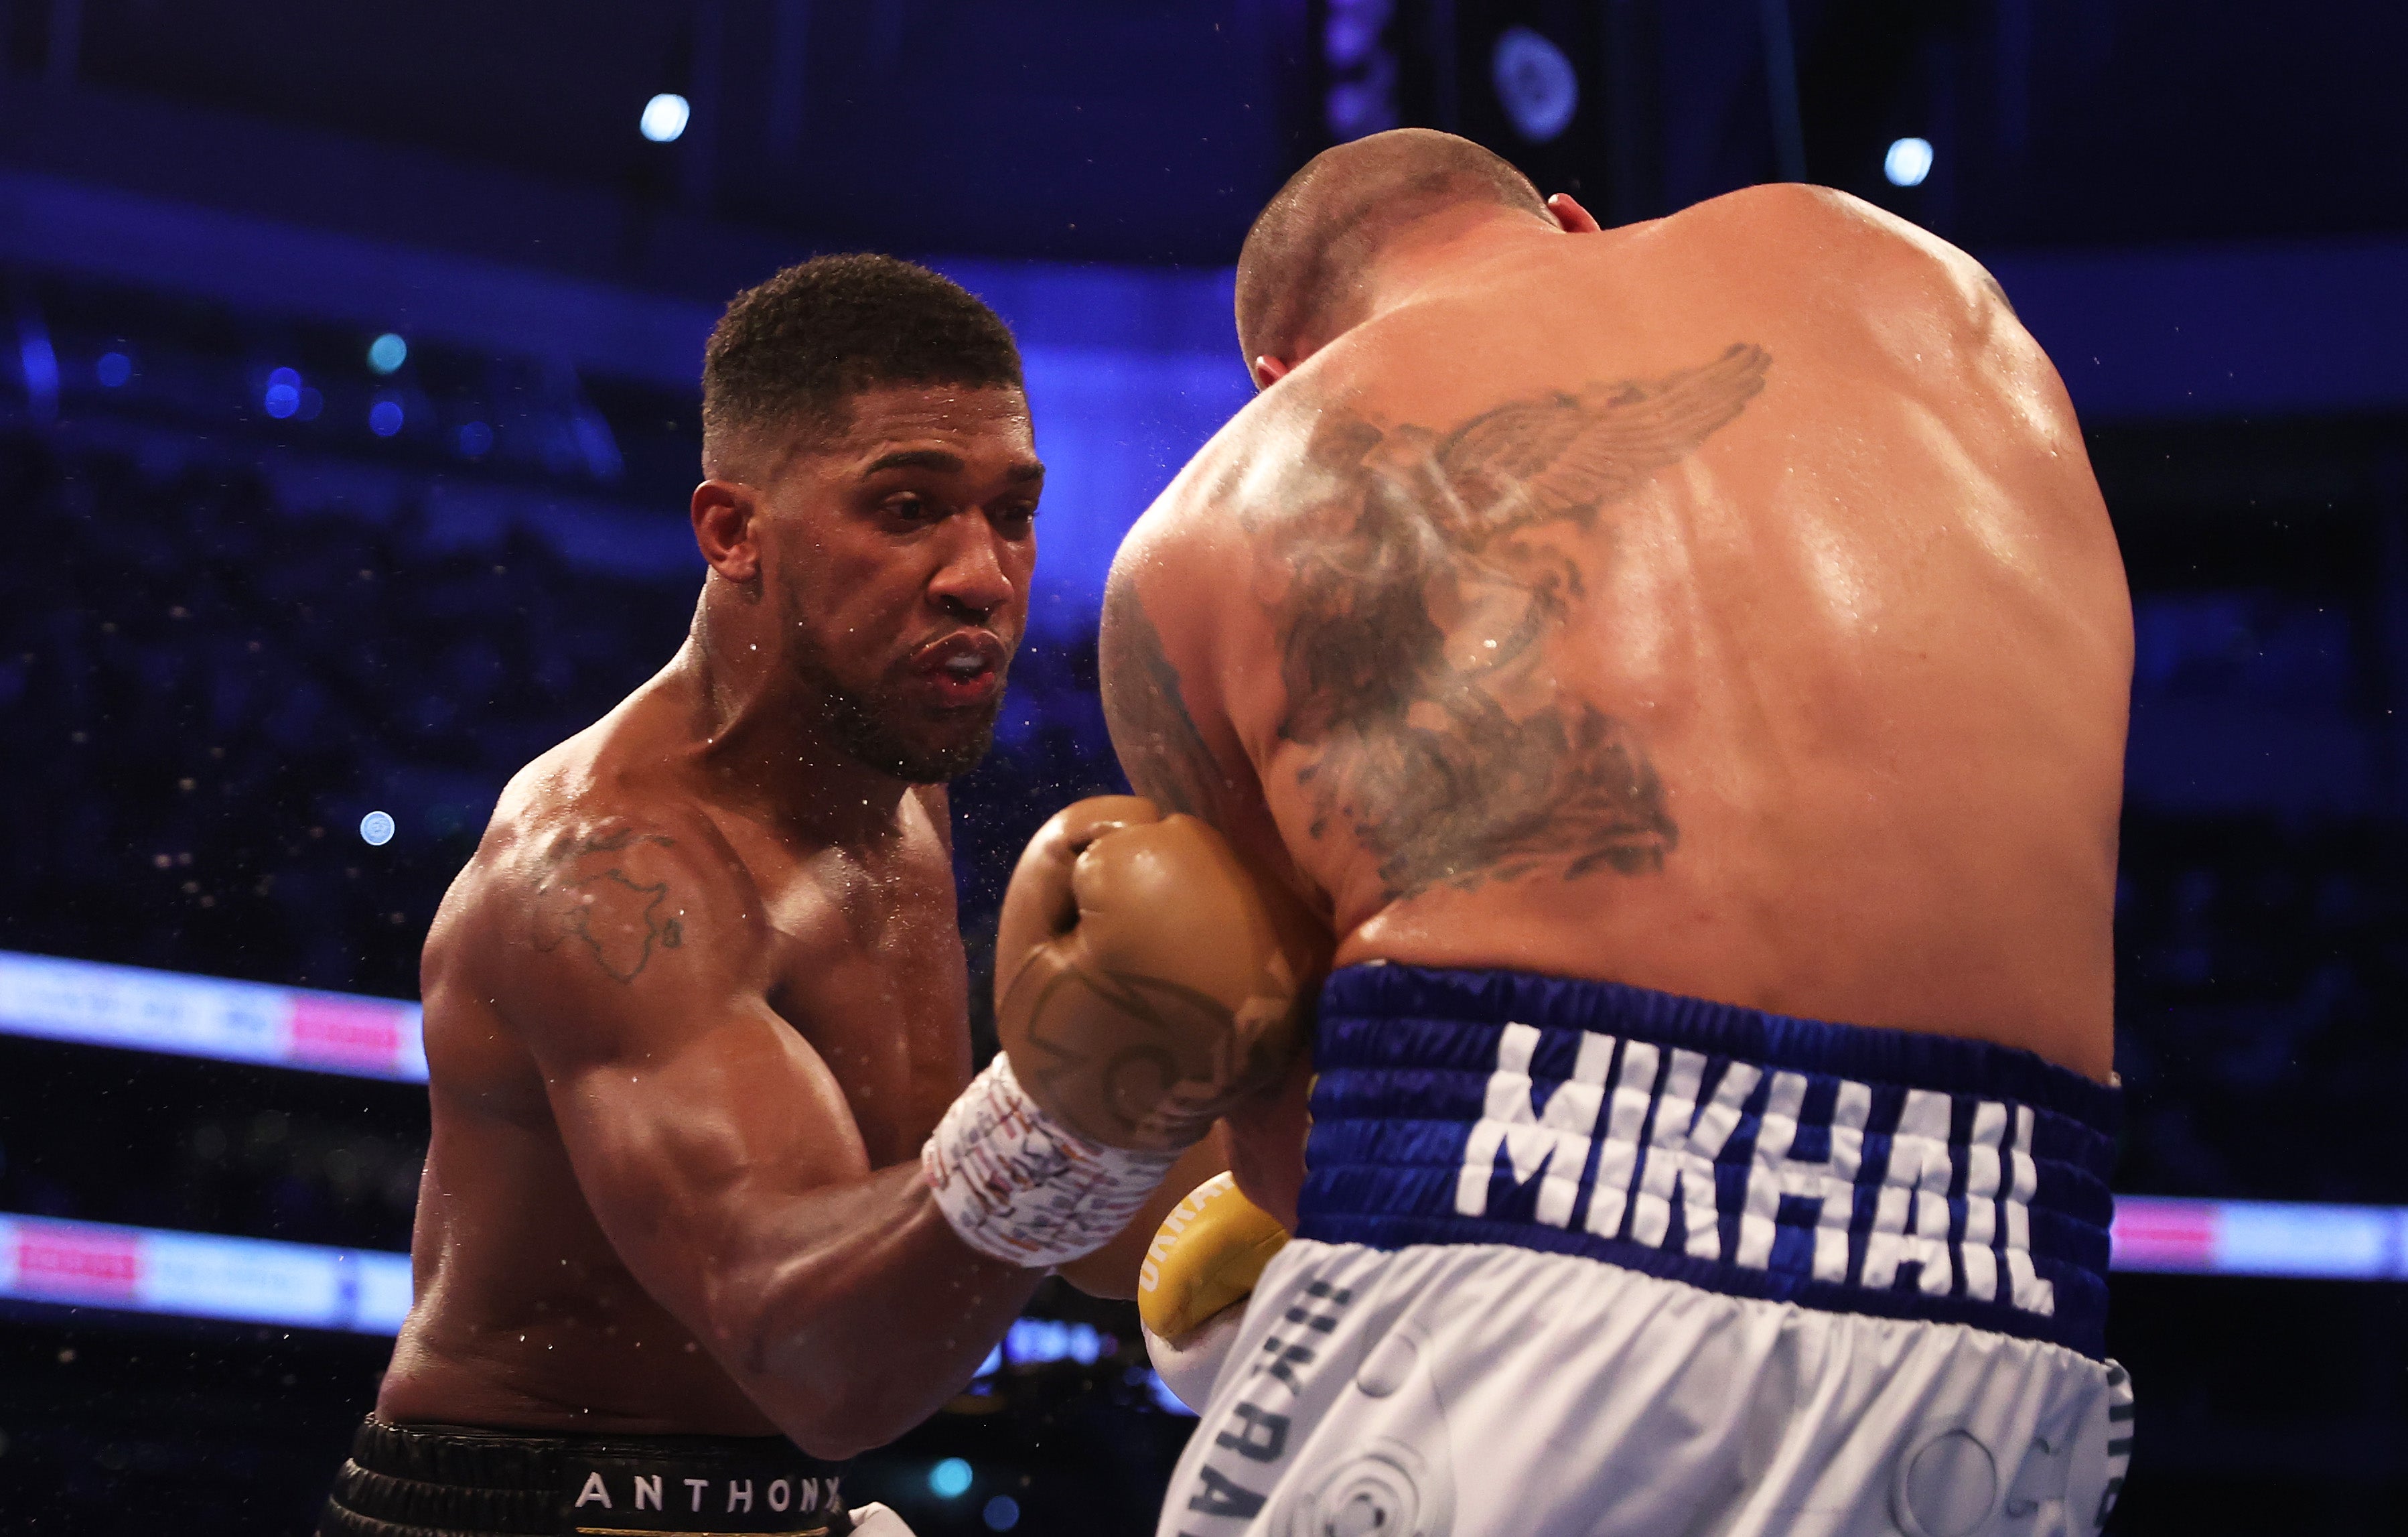 Anthony Joshua fought and lost to Oleksandr Usyk in September